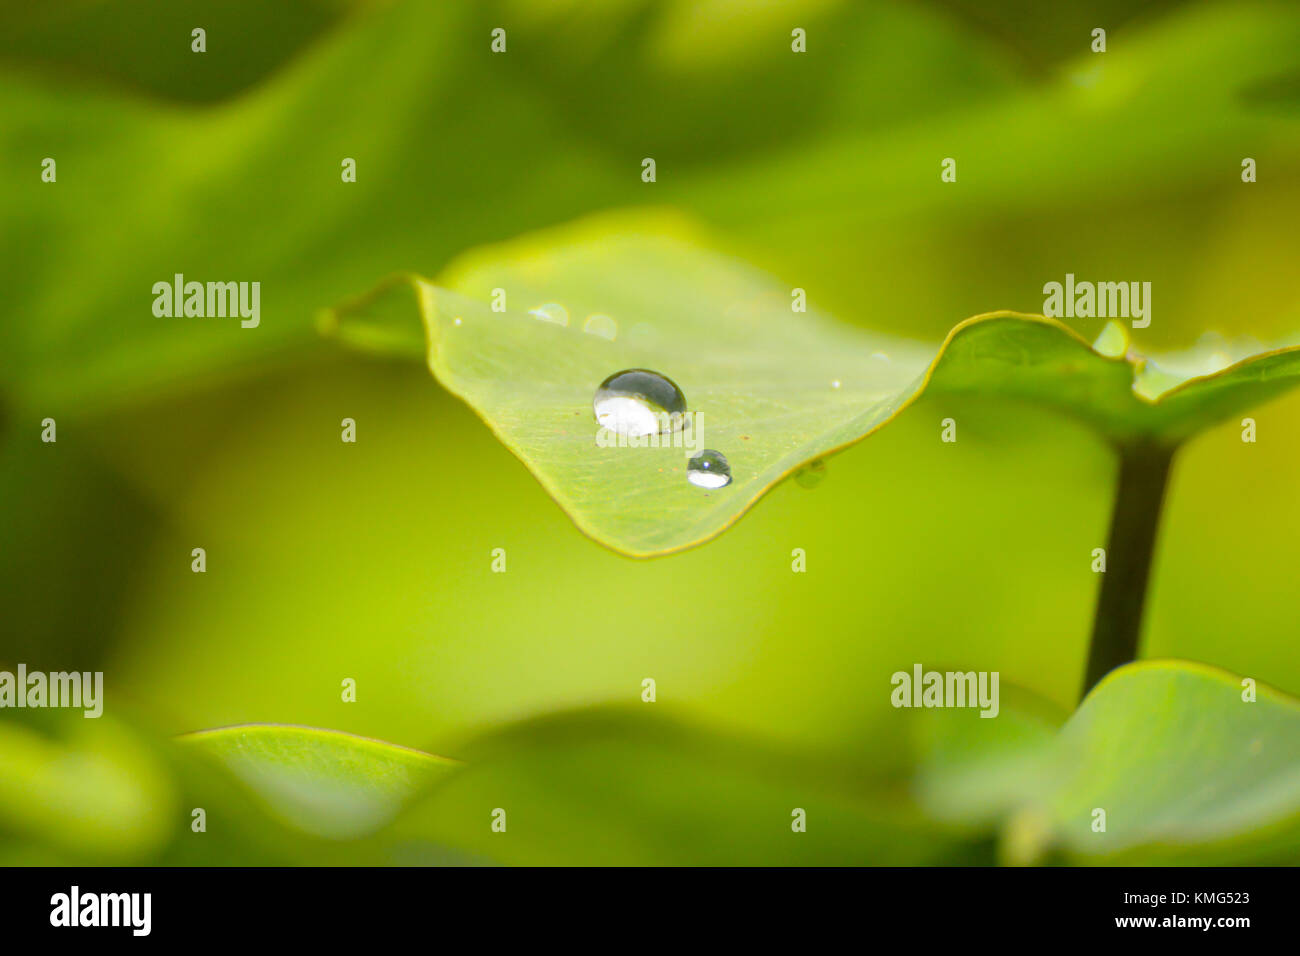 Water drops on a taro leaf; picture taken at Khao Sok National Park, Thailand. Stock Photo